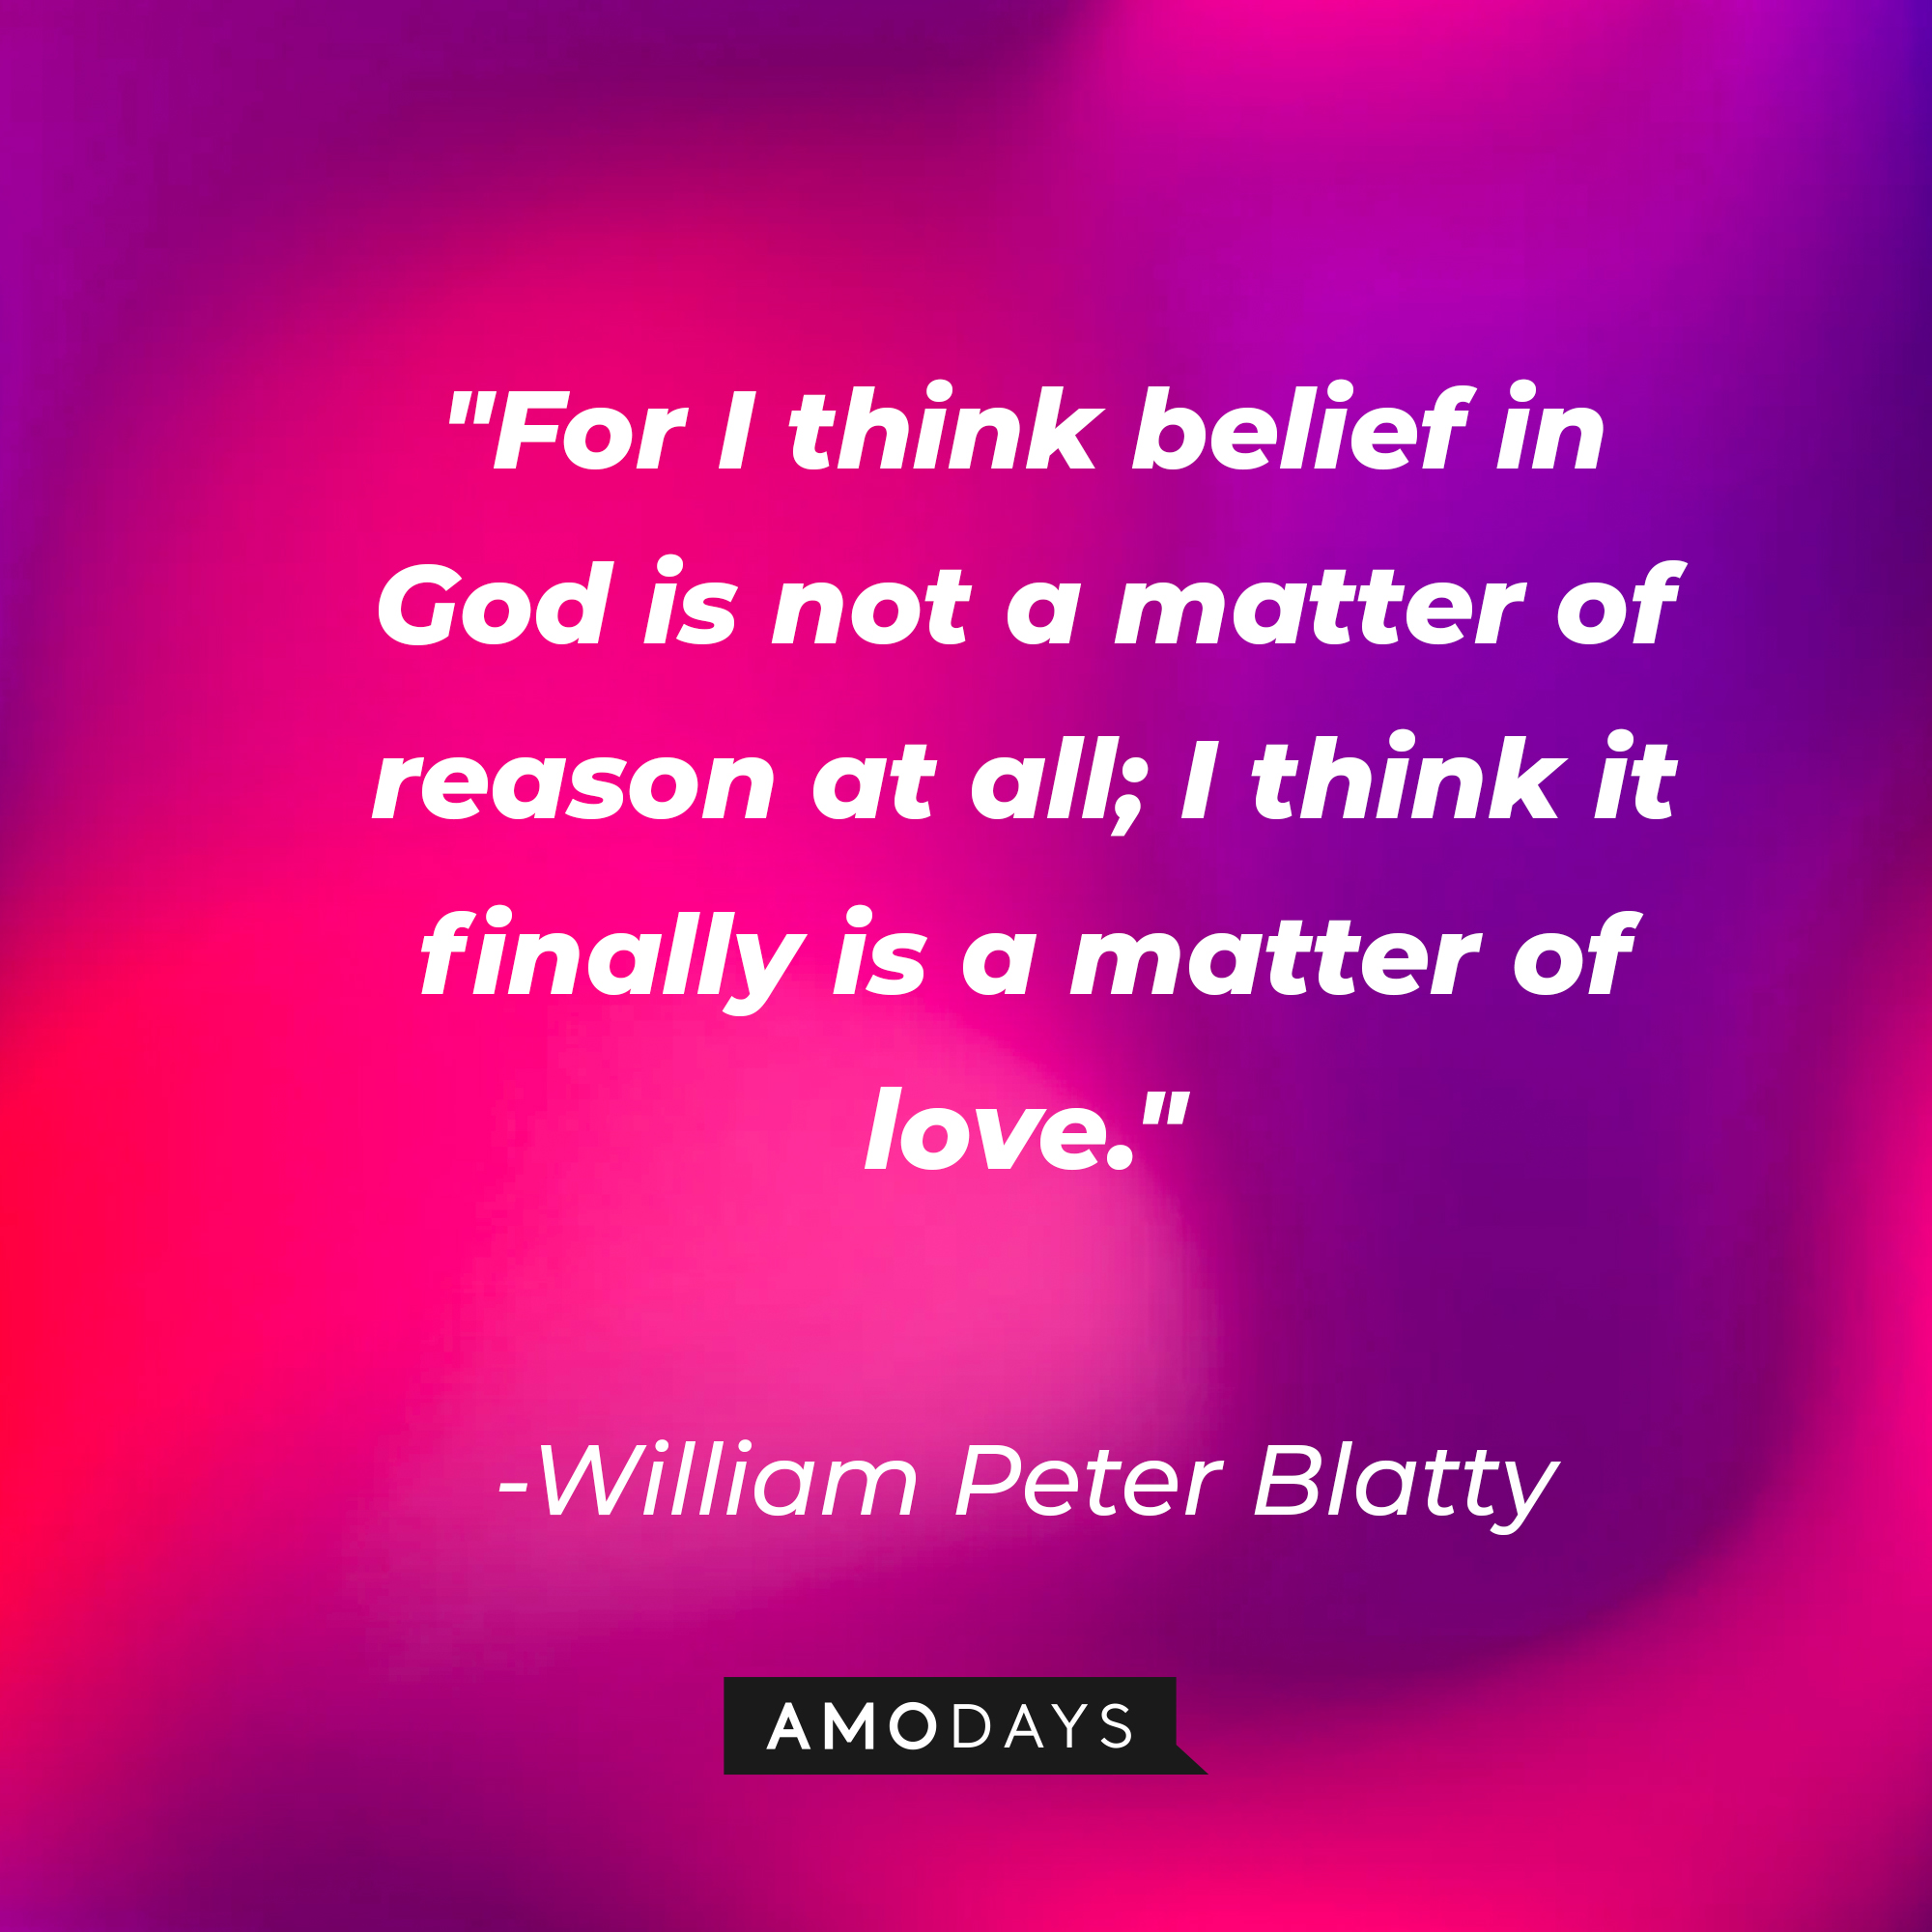 William Peter Blatty's quote: "For I think belief in God is not a matter of reason at all; I think it finally is a matter of love." | Source: AmoDays